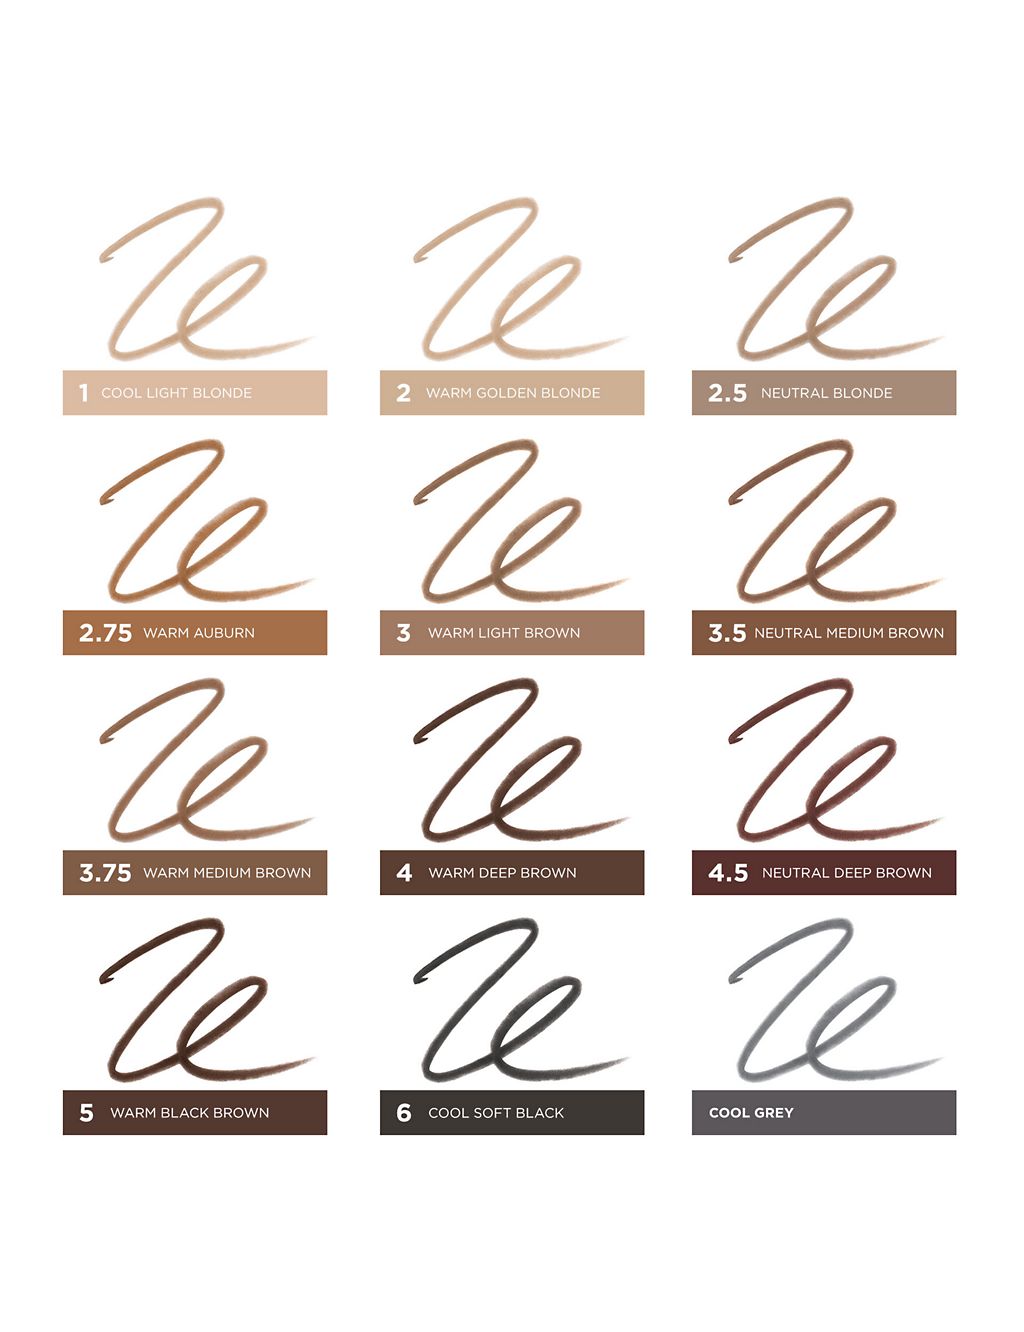 Precisely, My Brow Eyebrow Pencil Mini 0.04g 8 of 8